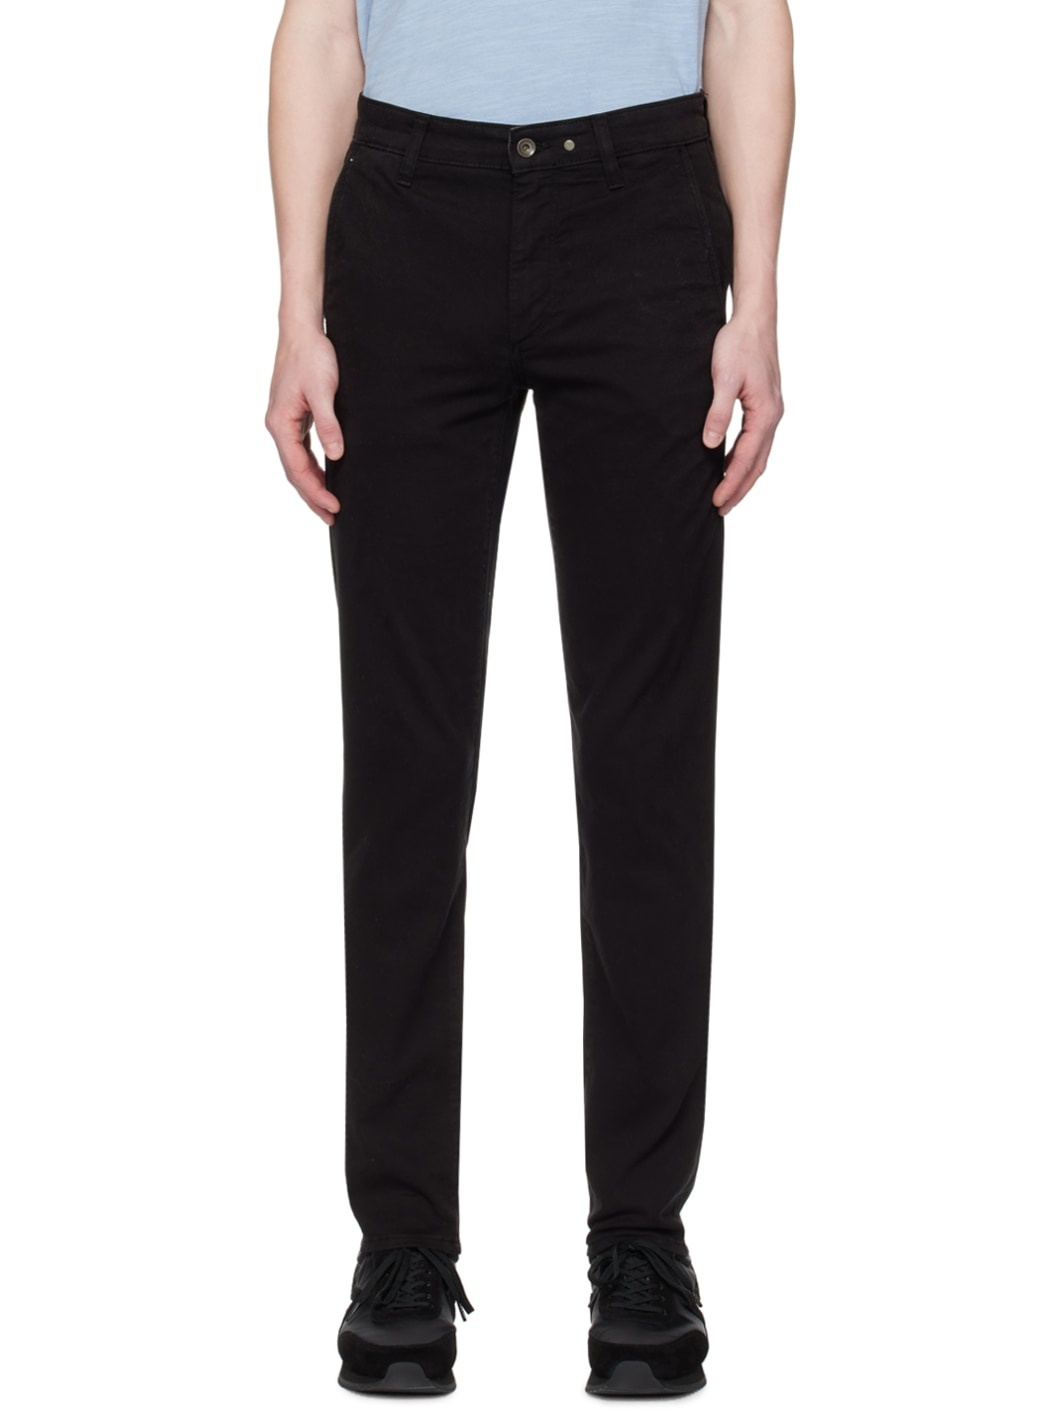 Black Fit 2 Trousers - 1